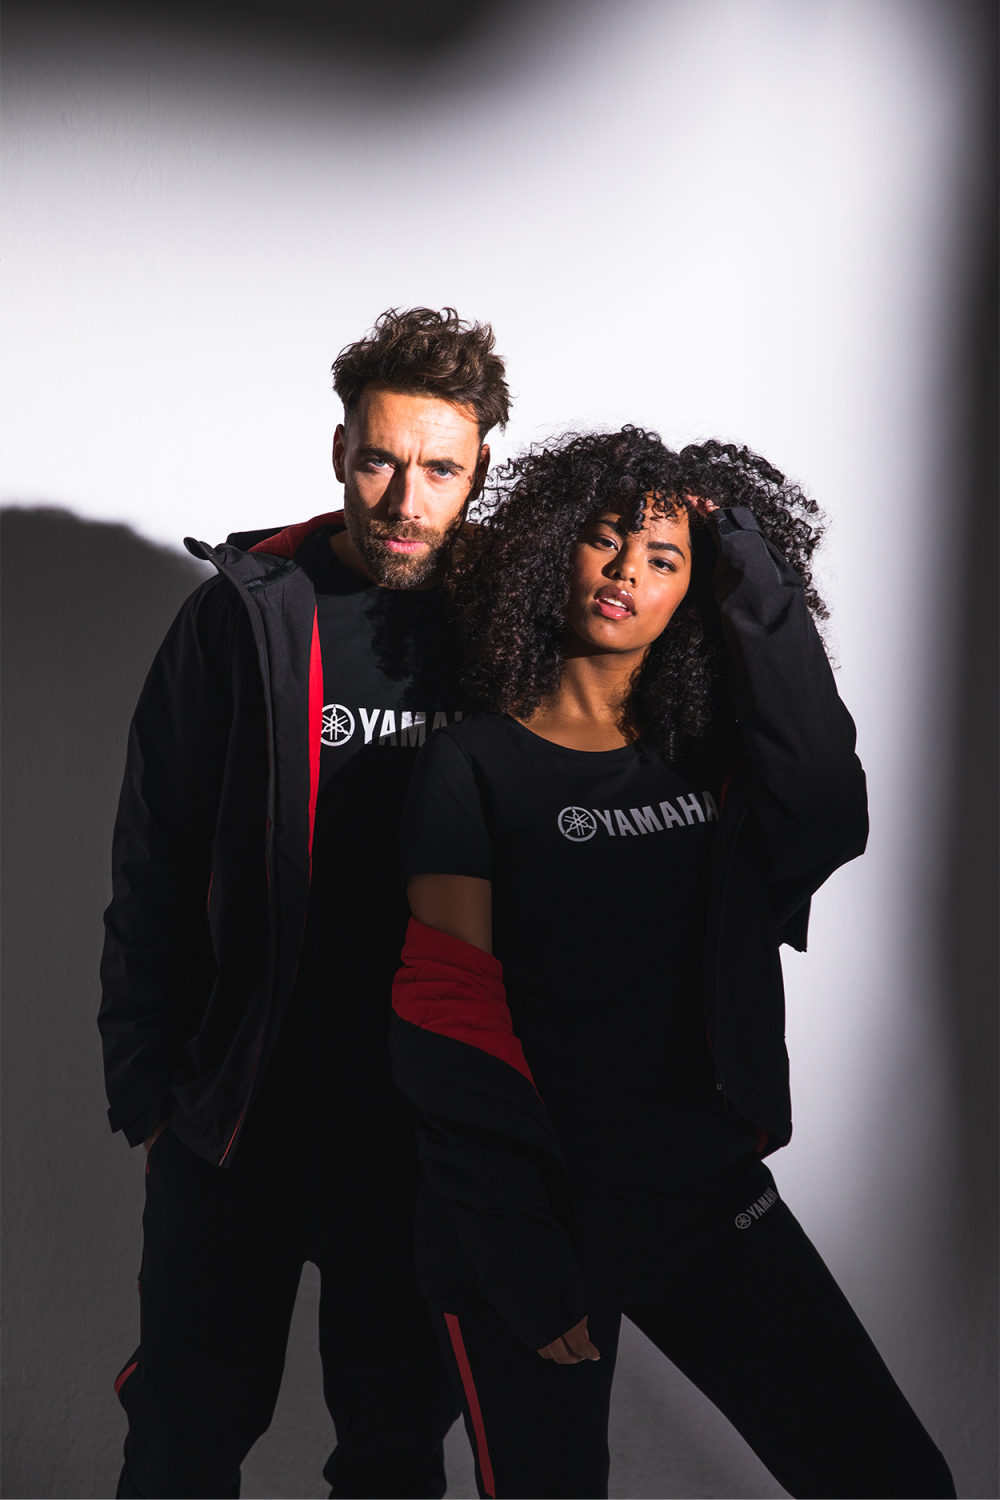 Man and woman with Yamaha clothes posing casually against a spotlight.